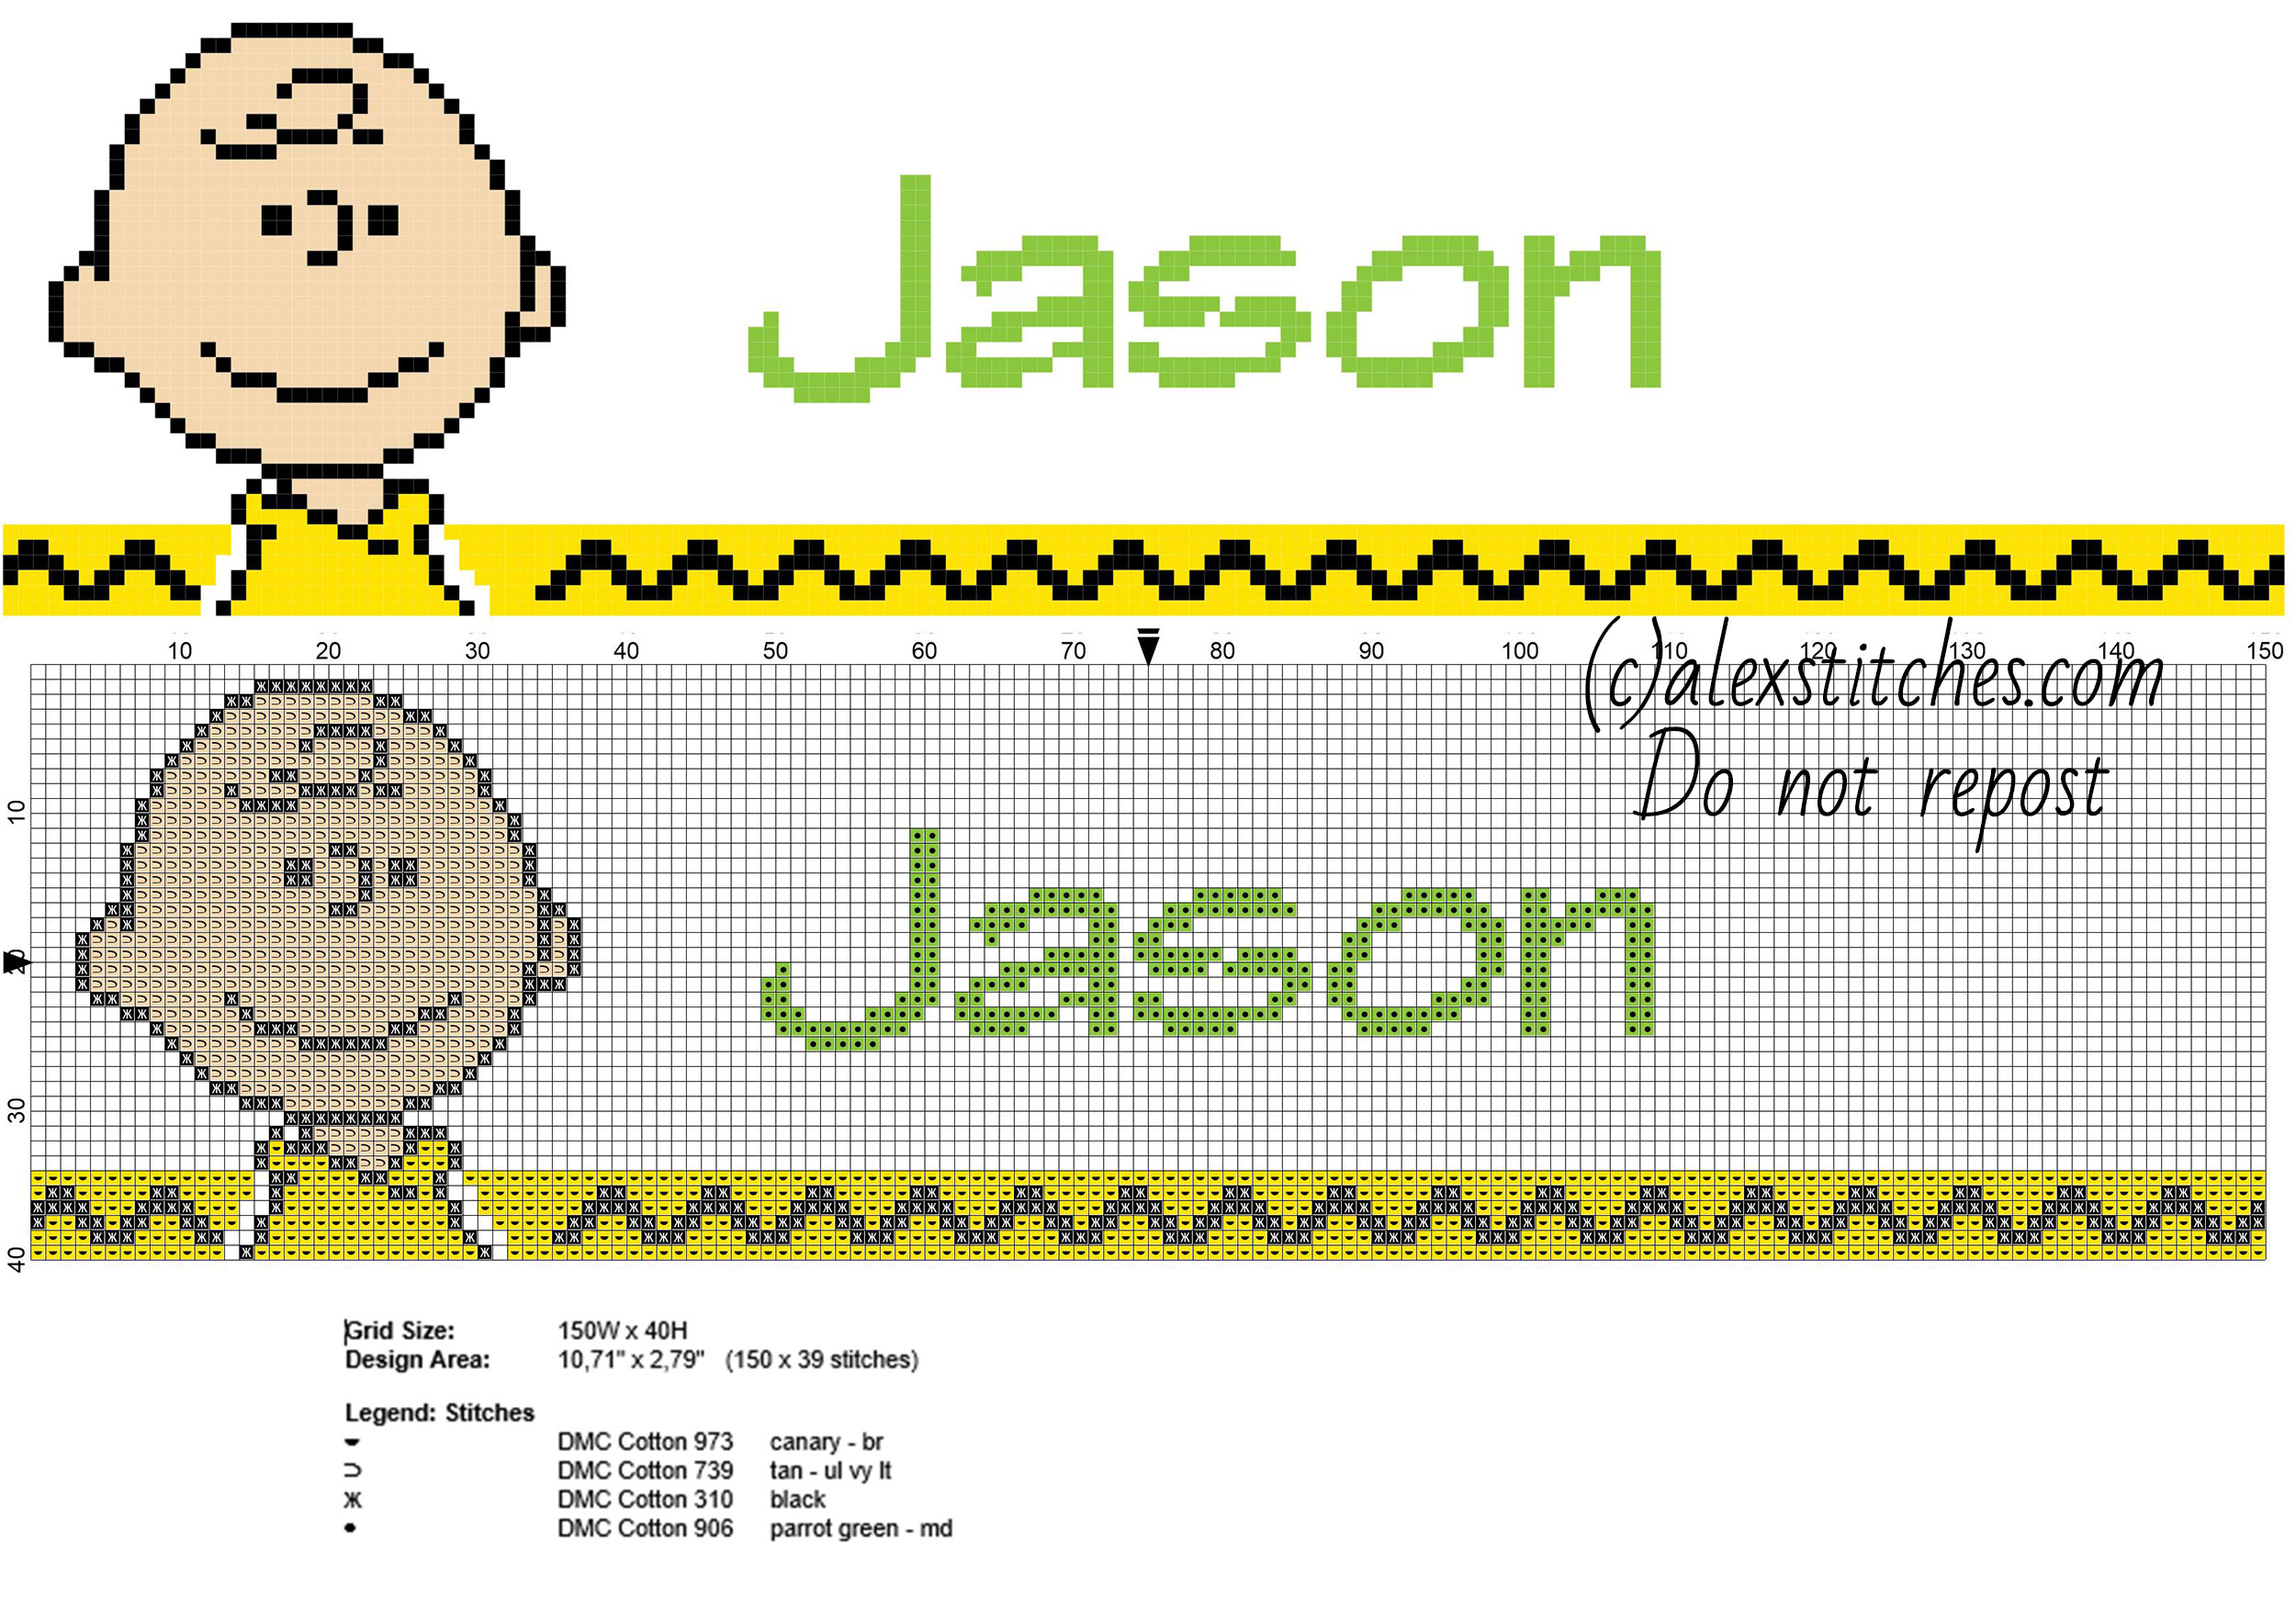 Jason cross stitch baby male name with Charlie Brown Peanuts